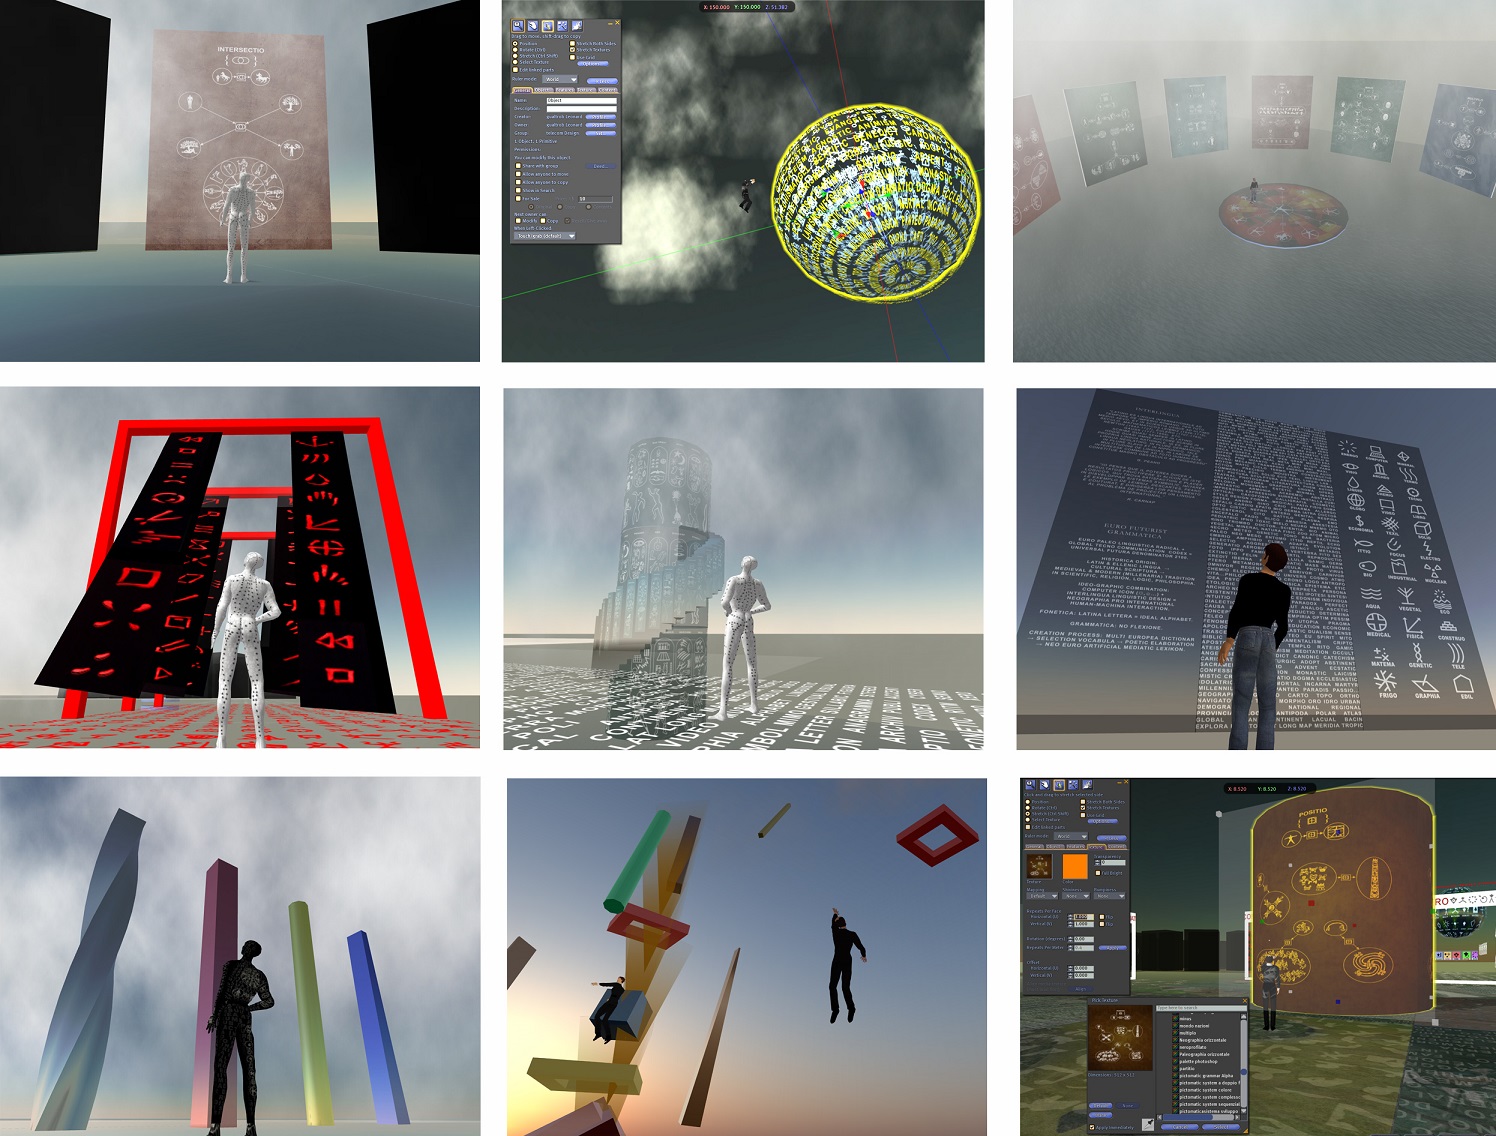 The art installation Codexart realized by Carraro LAB in Second Life